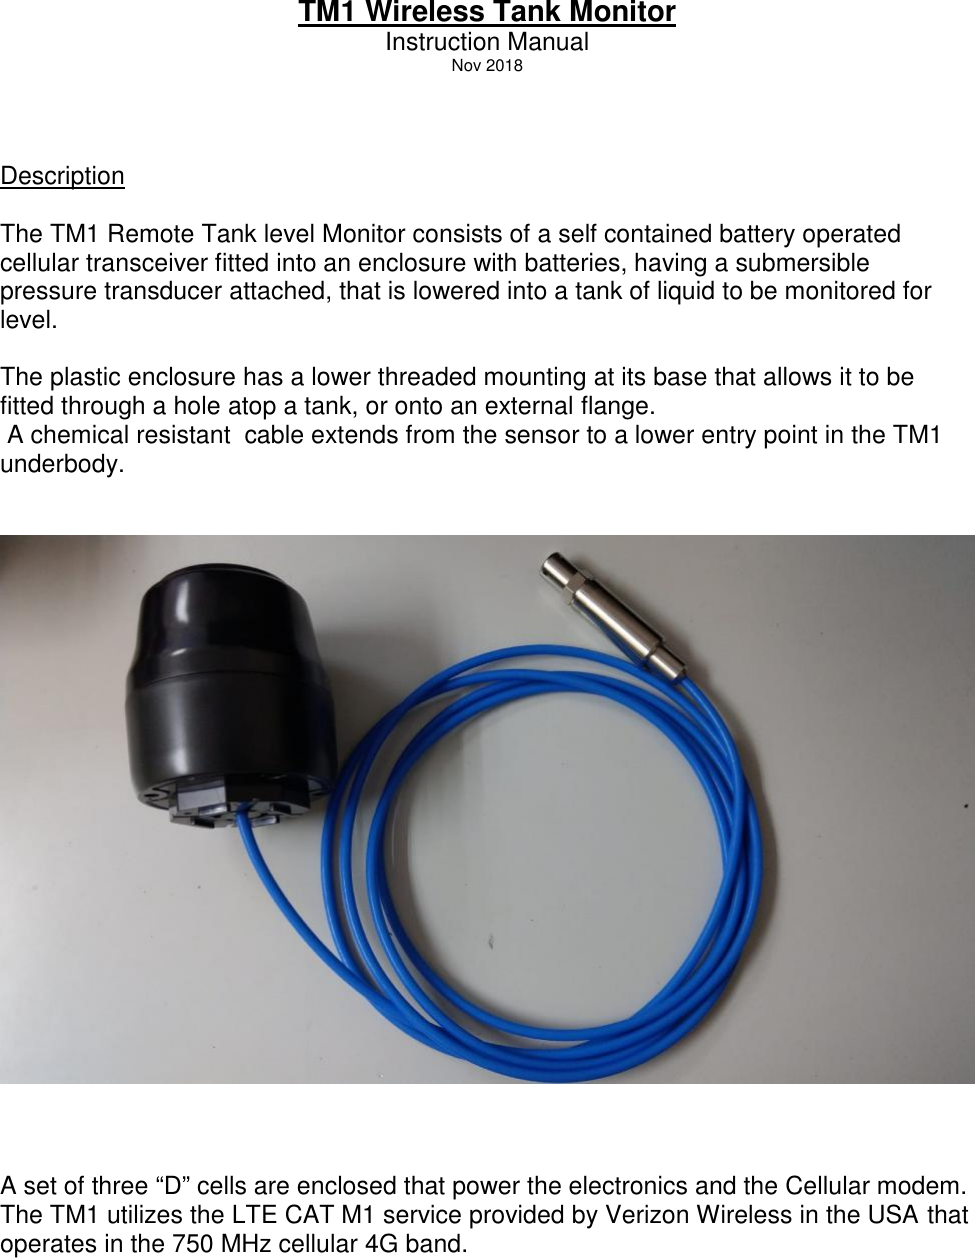 TM1 Wireless Tank MonitorInstruction ManualNov 2018DescriptionThe TM1 Remote Tank level Monitor consists of a self contained battery operatedcellular transceiver fitted into an enclosure with batteries, having a submersiblepressure transducer attached, that is lowered into a tank of liquid to be monitored forlevel.The plastic enclosure has a lower threaded mounting at its base that allows it to befitted through a hole atop a tank, or onto an external flange.A chemical resistant cable extends from the sensor to a lower entry point in the TM1underbody.A set of three “D” cells are enclosed that power the electronics and the Cellular modem.The TM1 utilizes the LTE CAT M1 service provided by Verizon Wireless in the USA thatoperates in the 750 MHz cellular 4G band.